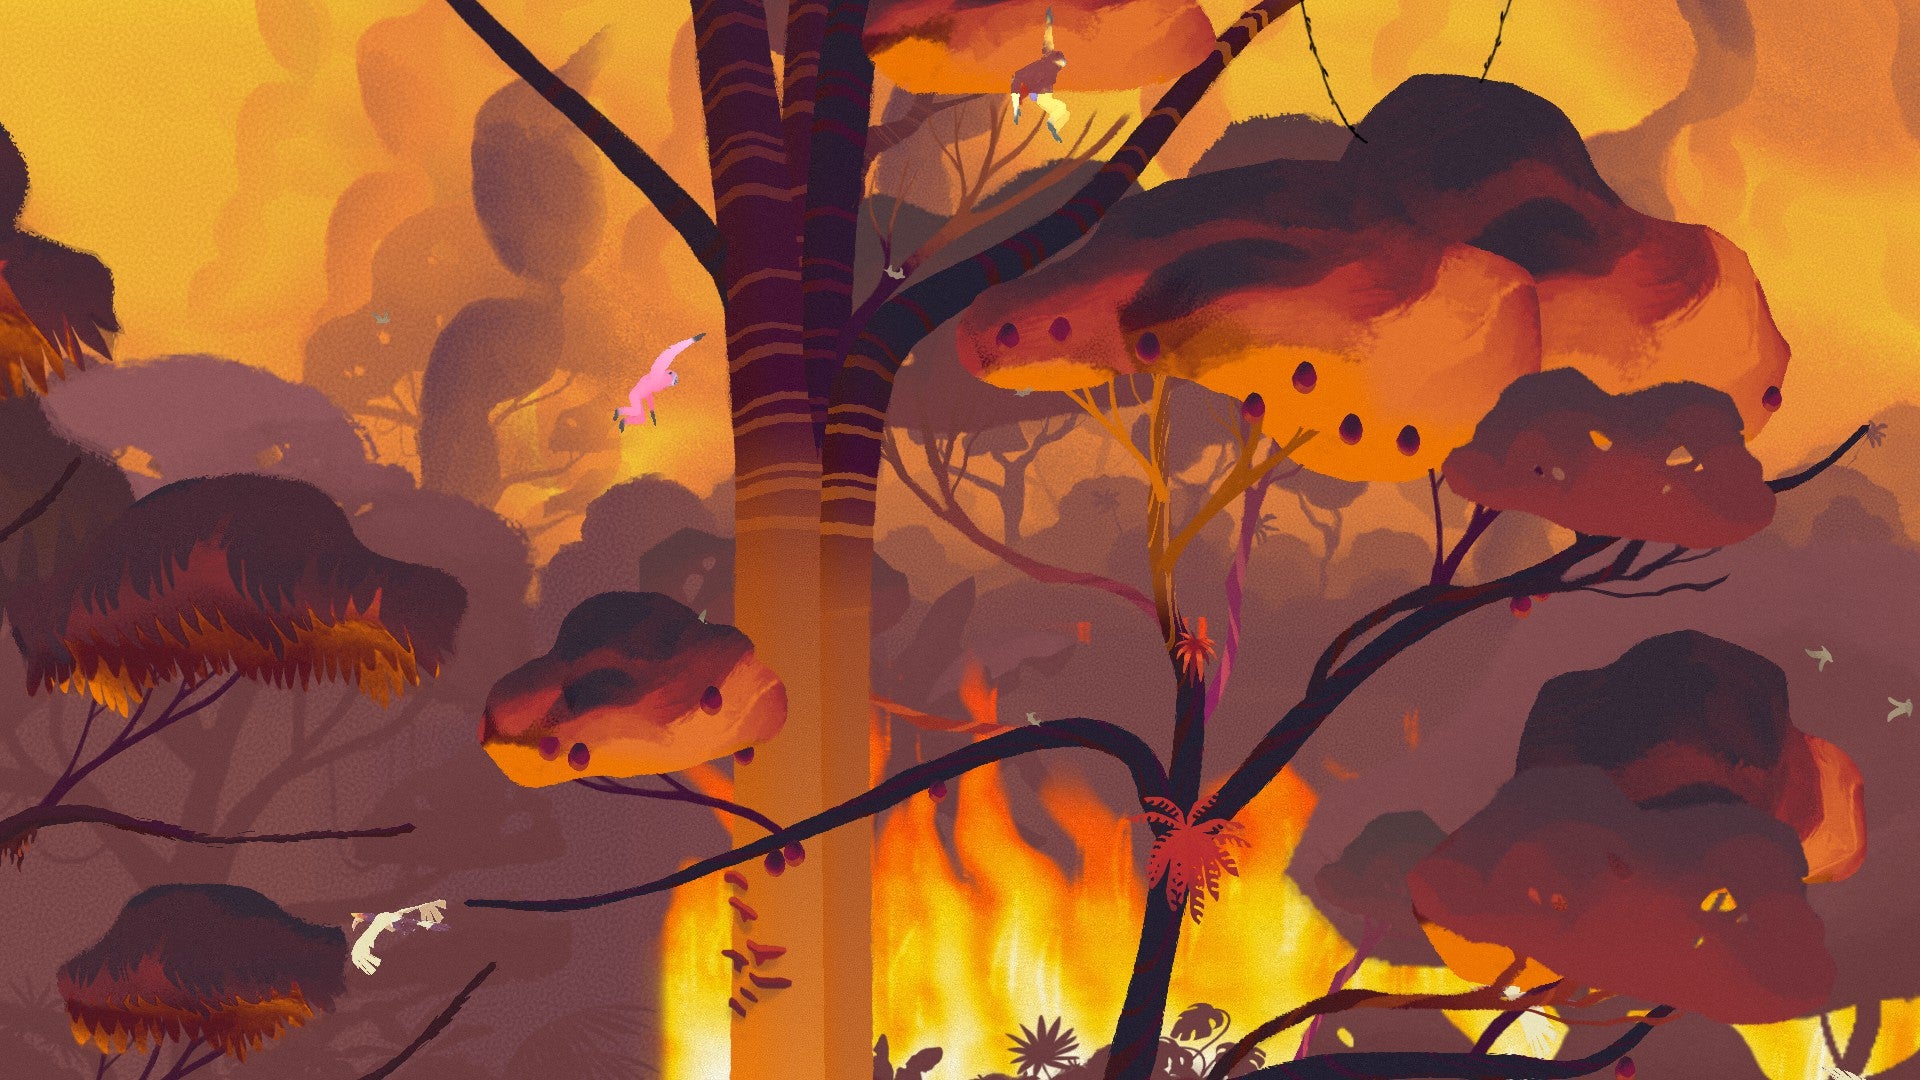 A gibbon swings through a jungle on fire and glowing orange.